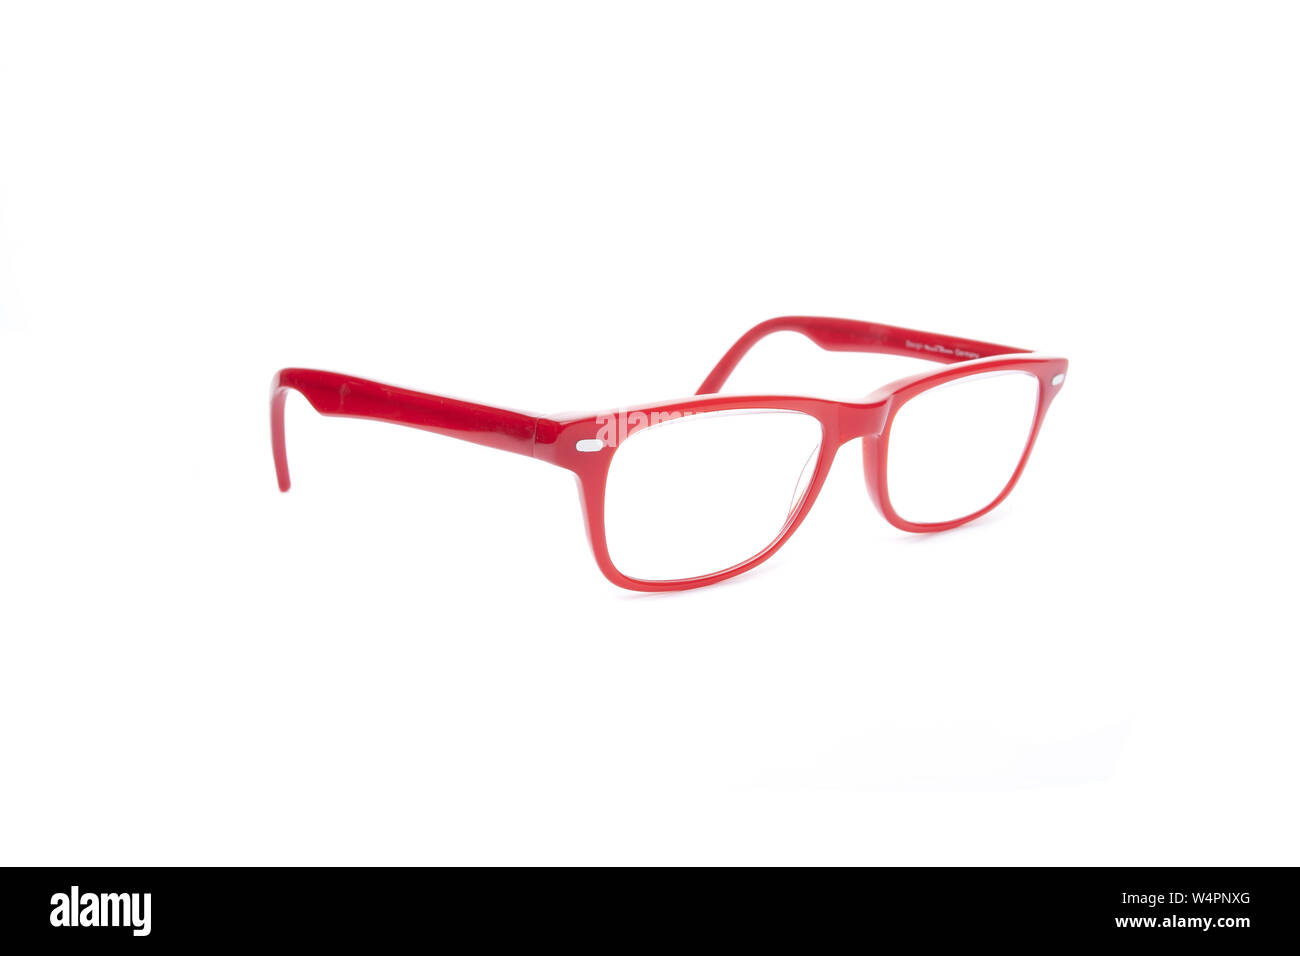 Red glasses isolated on white background Stock Photo